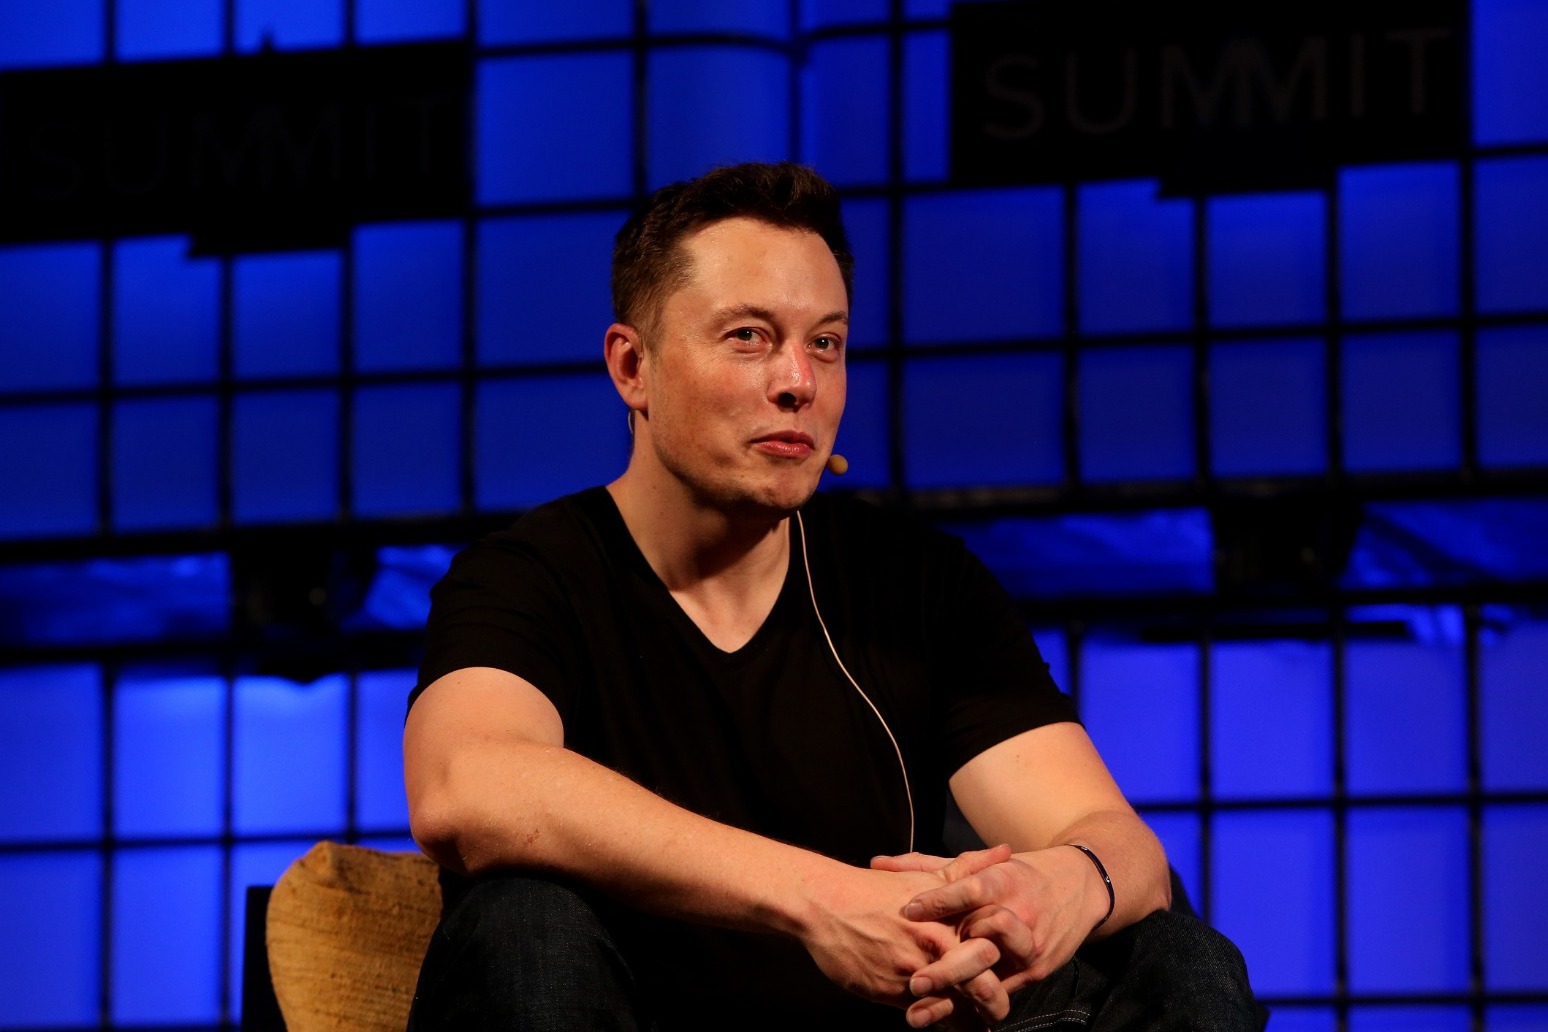 An ‘everything app’ and free speech issues: How would Elon Musk’s Twitter work? 